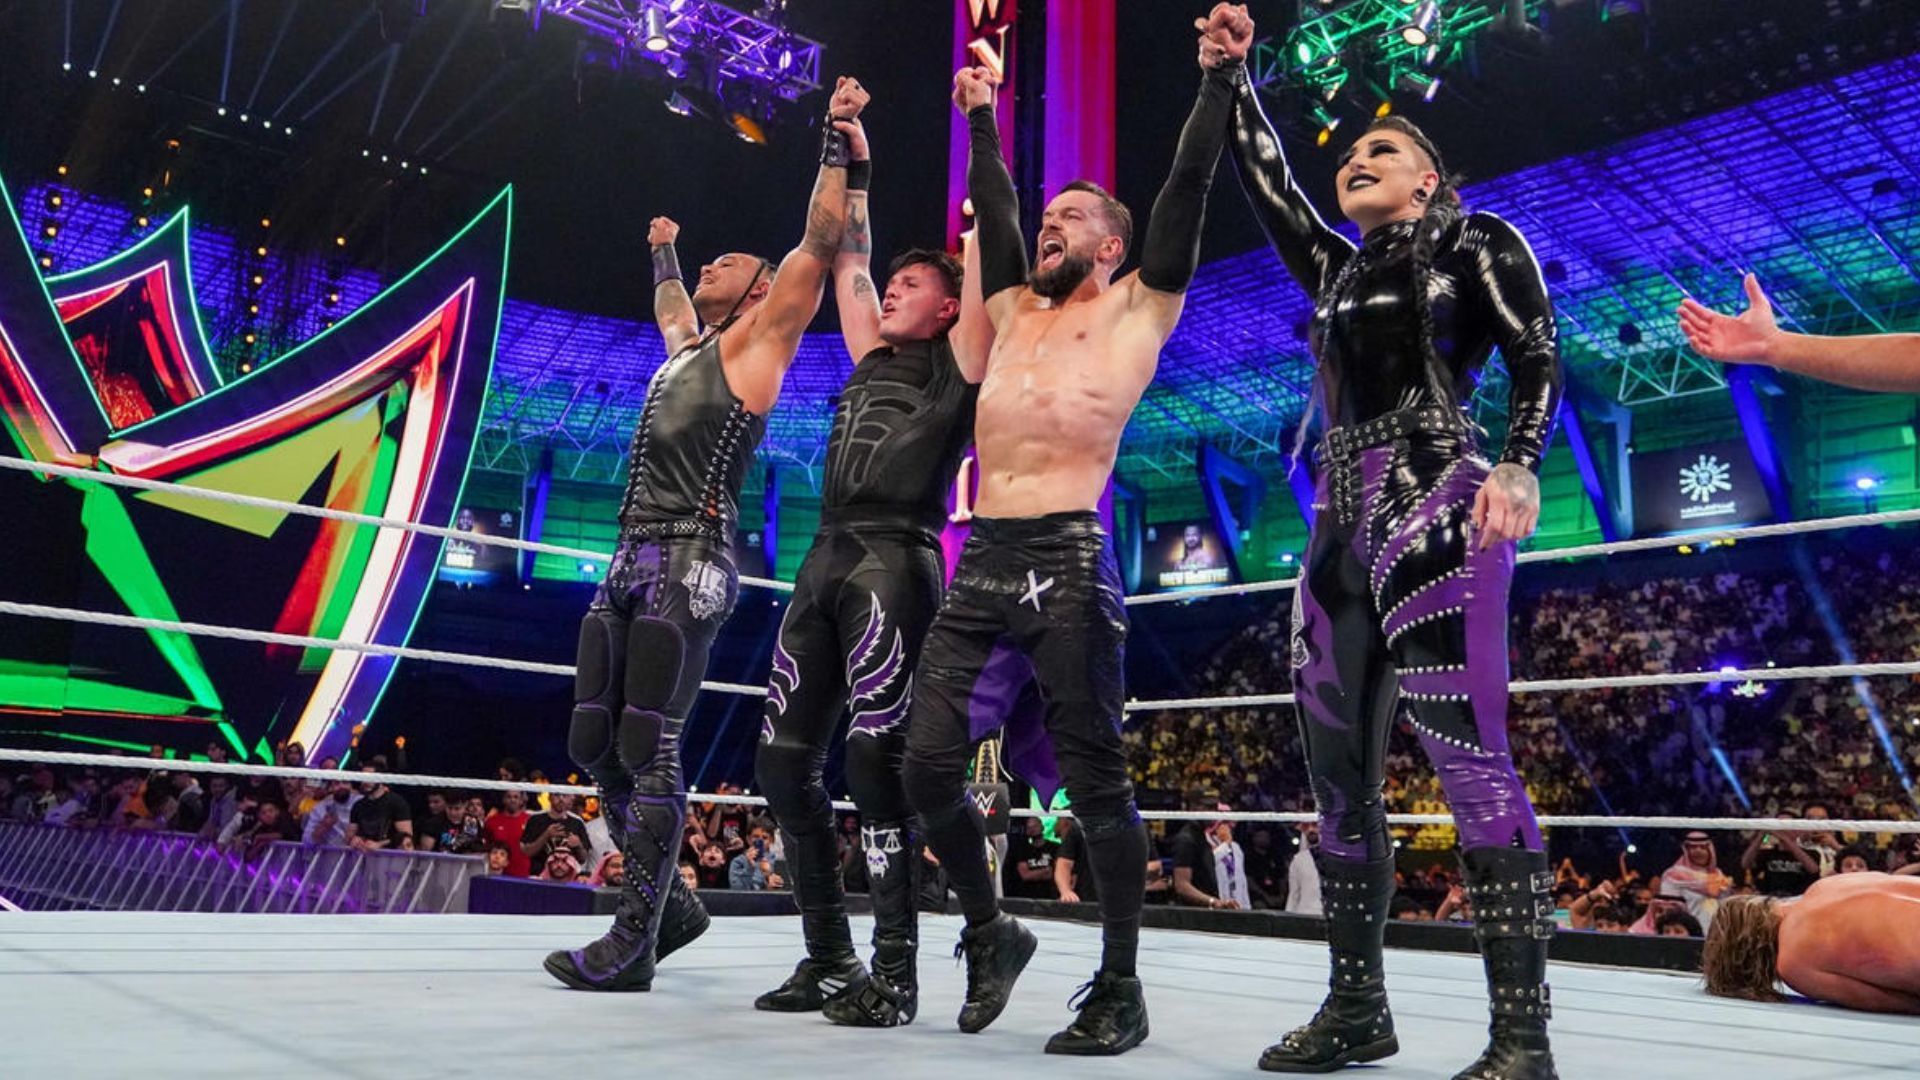 The Judgment Day celebrating their victory. Image Credits: wwe.com